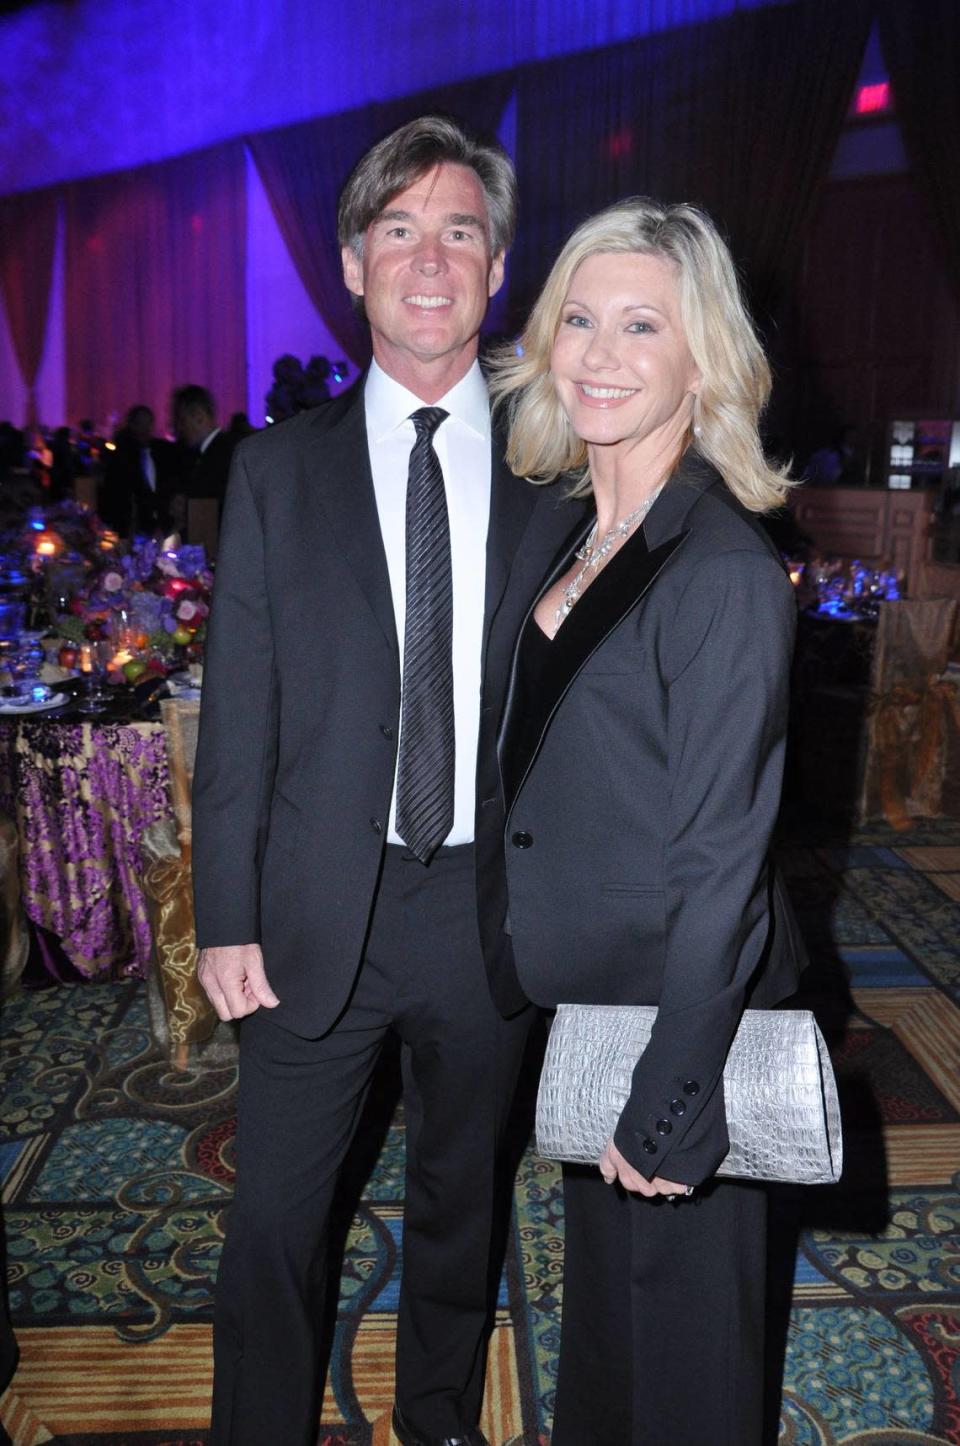 Olivia Newton-John and husband John Easterling at the Love and Hope Ball at the Diplomat Hotel in Hollywood, Florida in a file photo from February 2009. The night was a benefit for the Diabetes Research Institute.